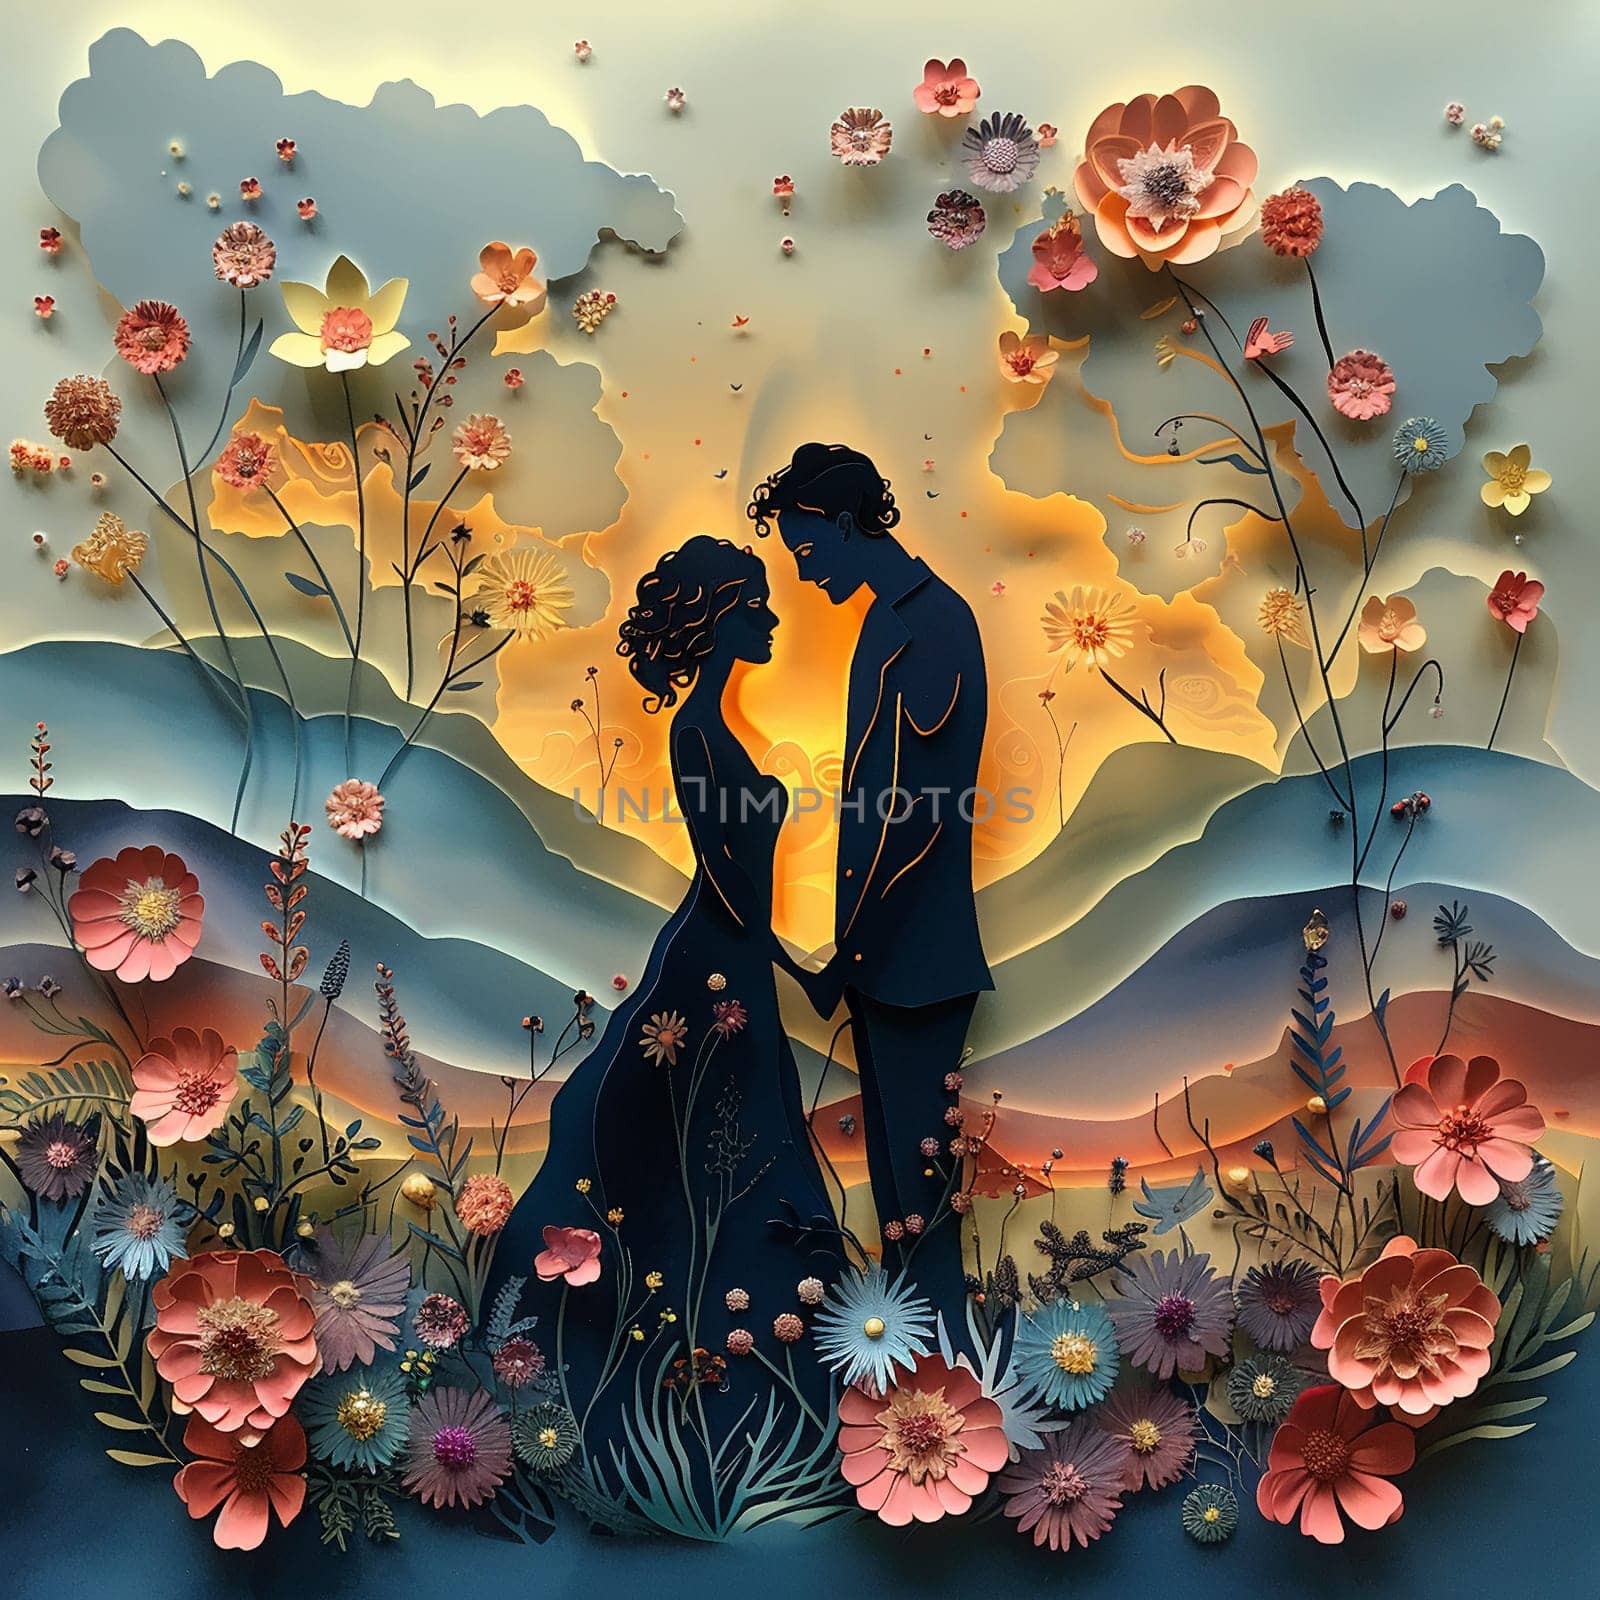 Romantic couples silhouette in a paper cut-out style set against a whimsical by Benzoix